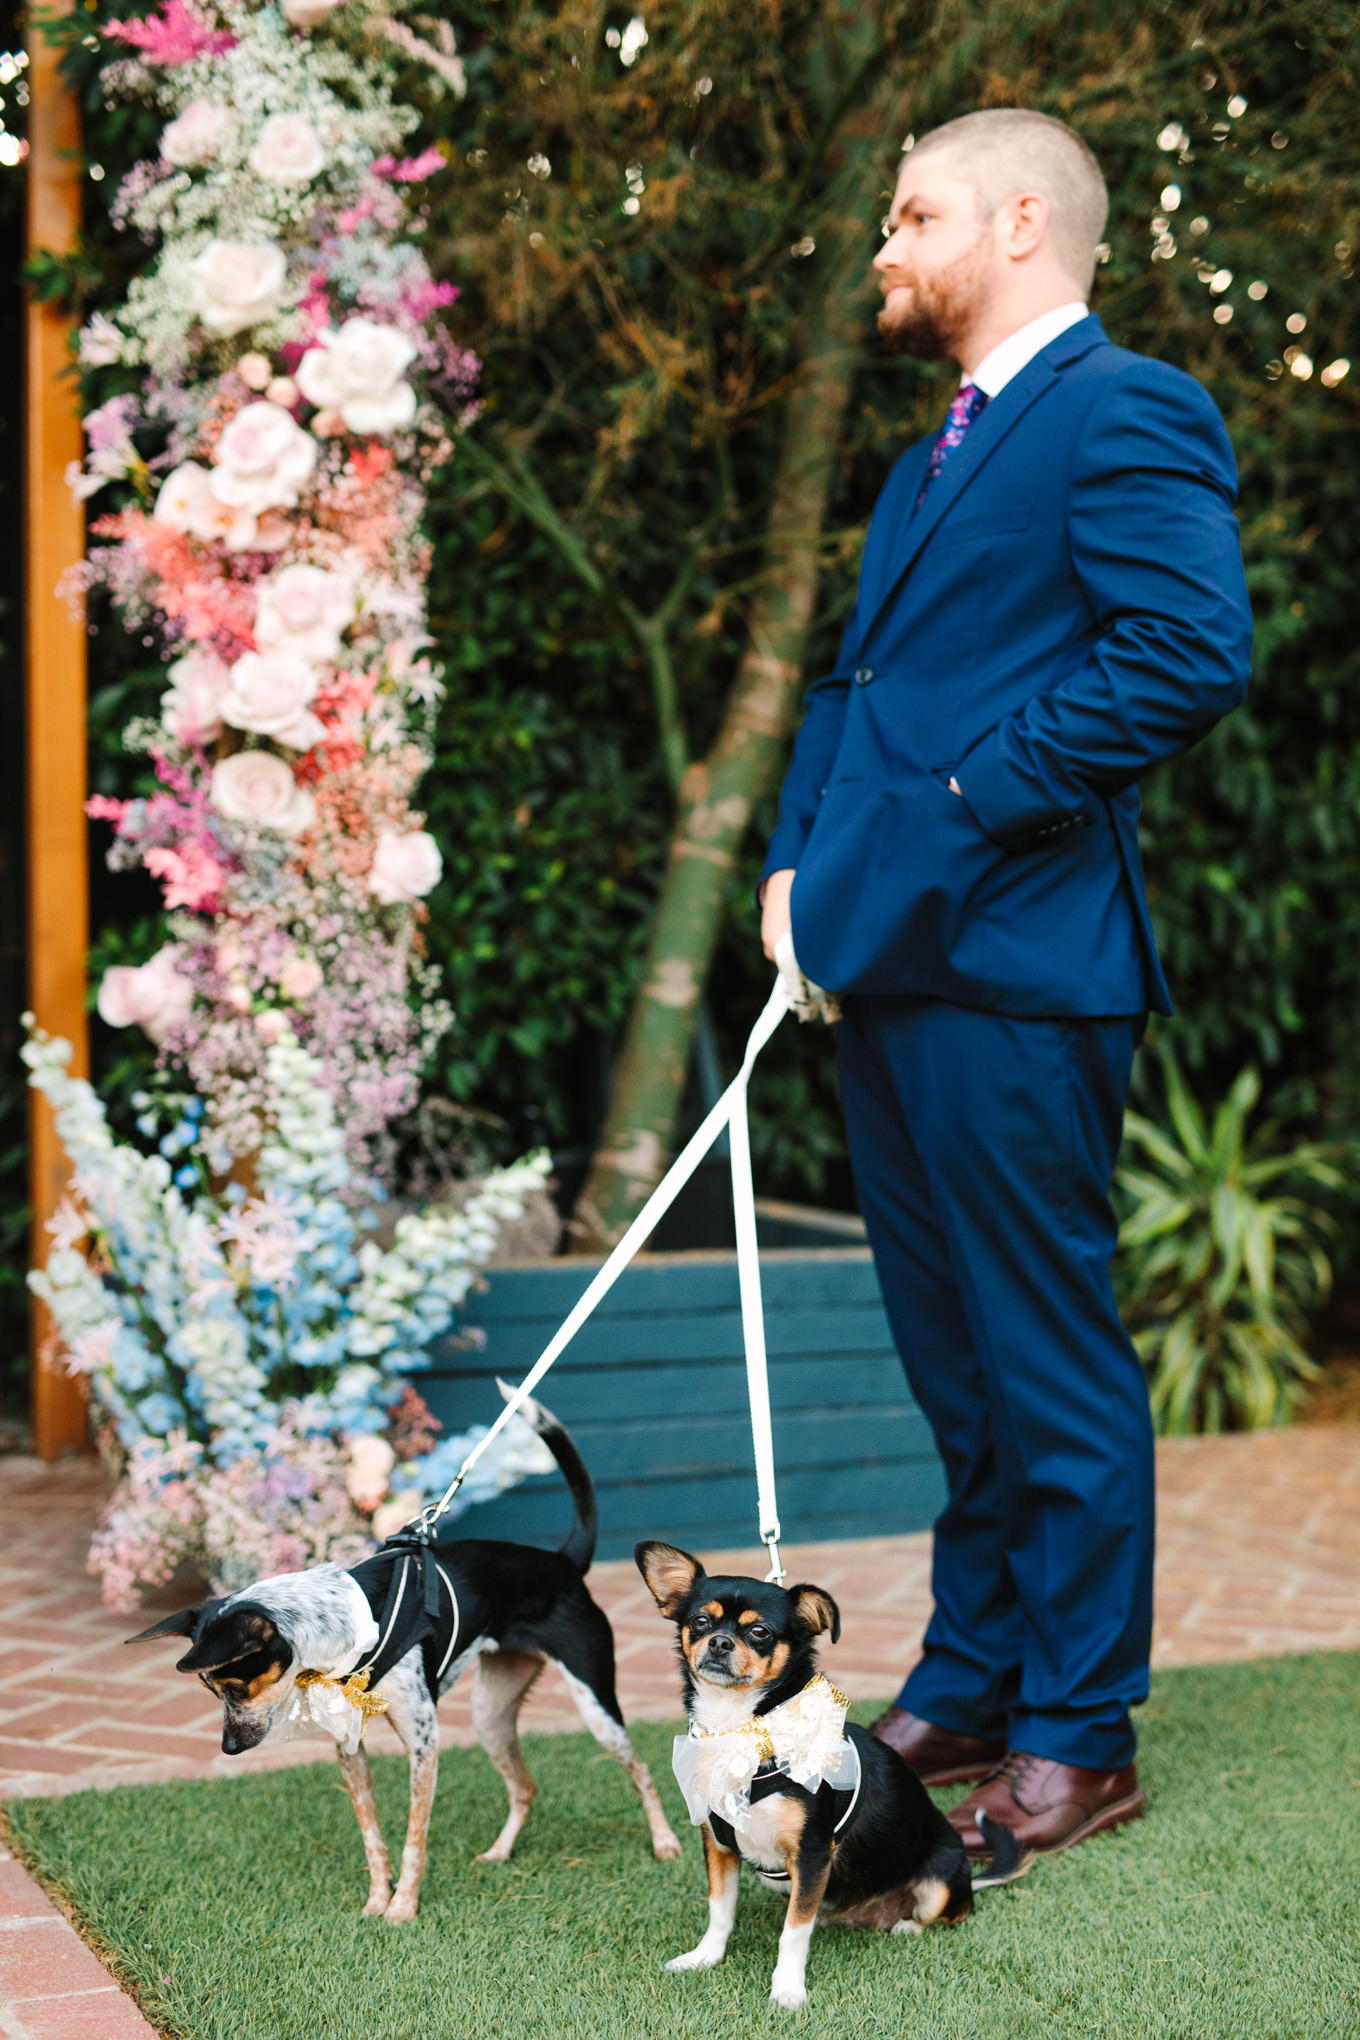 Best man with dogs at wedding ceremony | Colorful pop-up micro wedding at The Ruby Street Los Angeles featured on Green Wedding Shoes | Colorful and elevated photography for fun-loving couples in Southern California | #colorfulwedding #popupwedding #weddingphotography #microwedding Source: Mary Costa Photography | Los Angeles